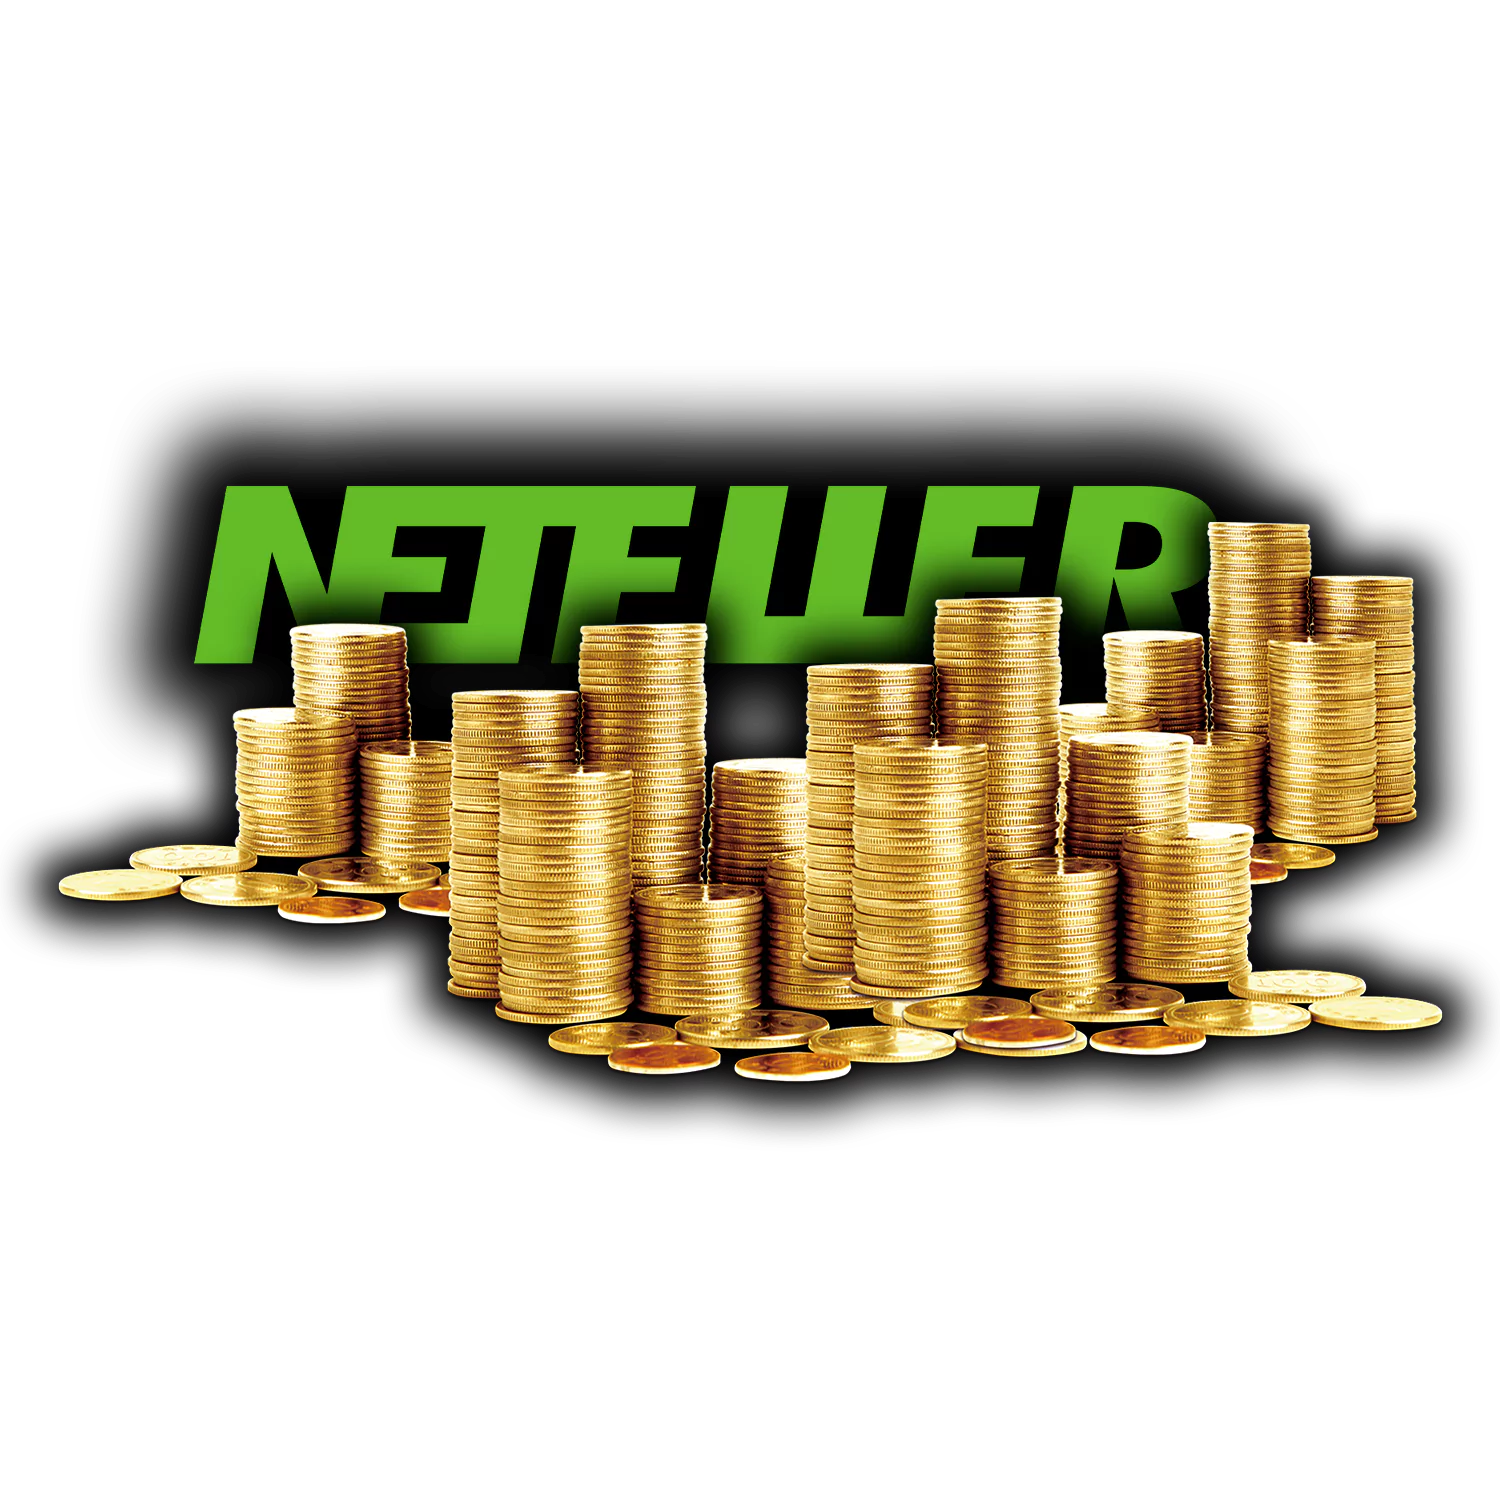 Here we share our review about using Neteller for betting in India.